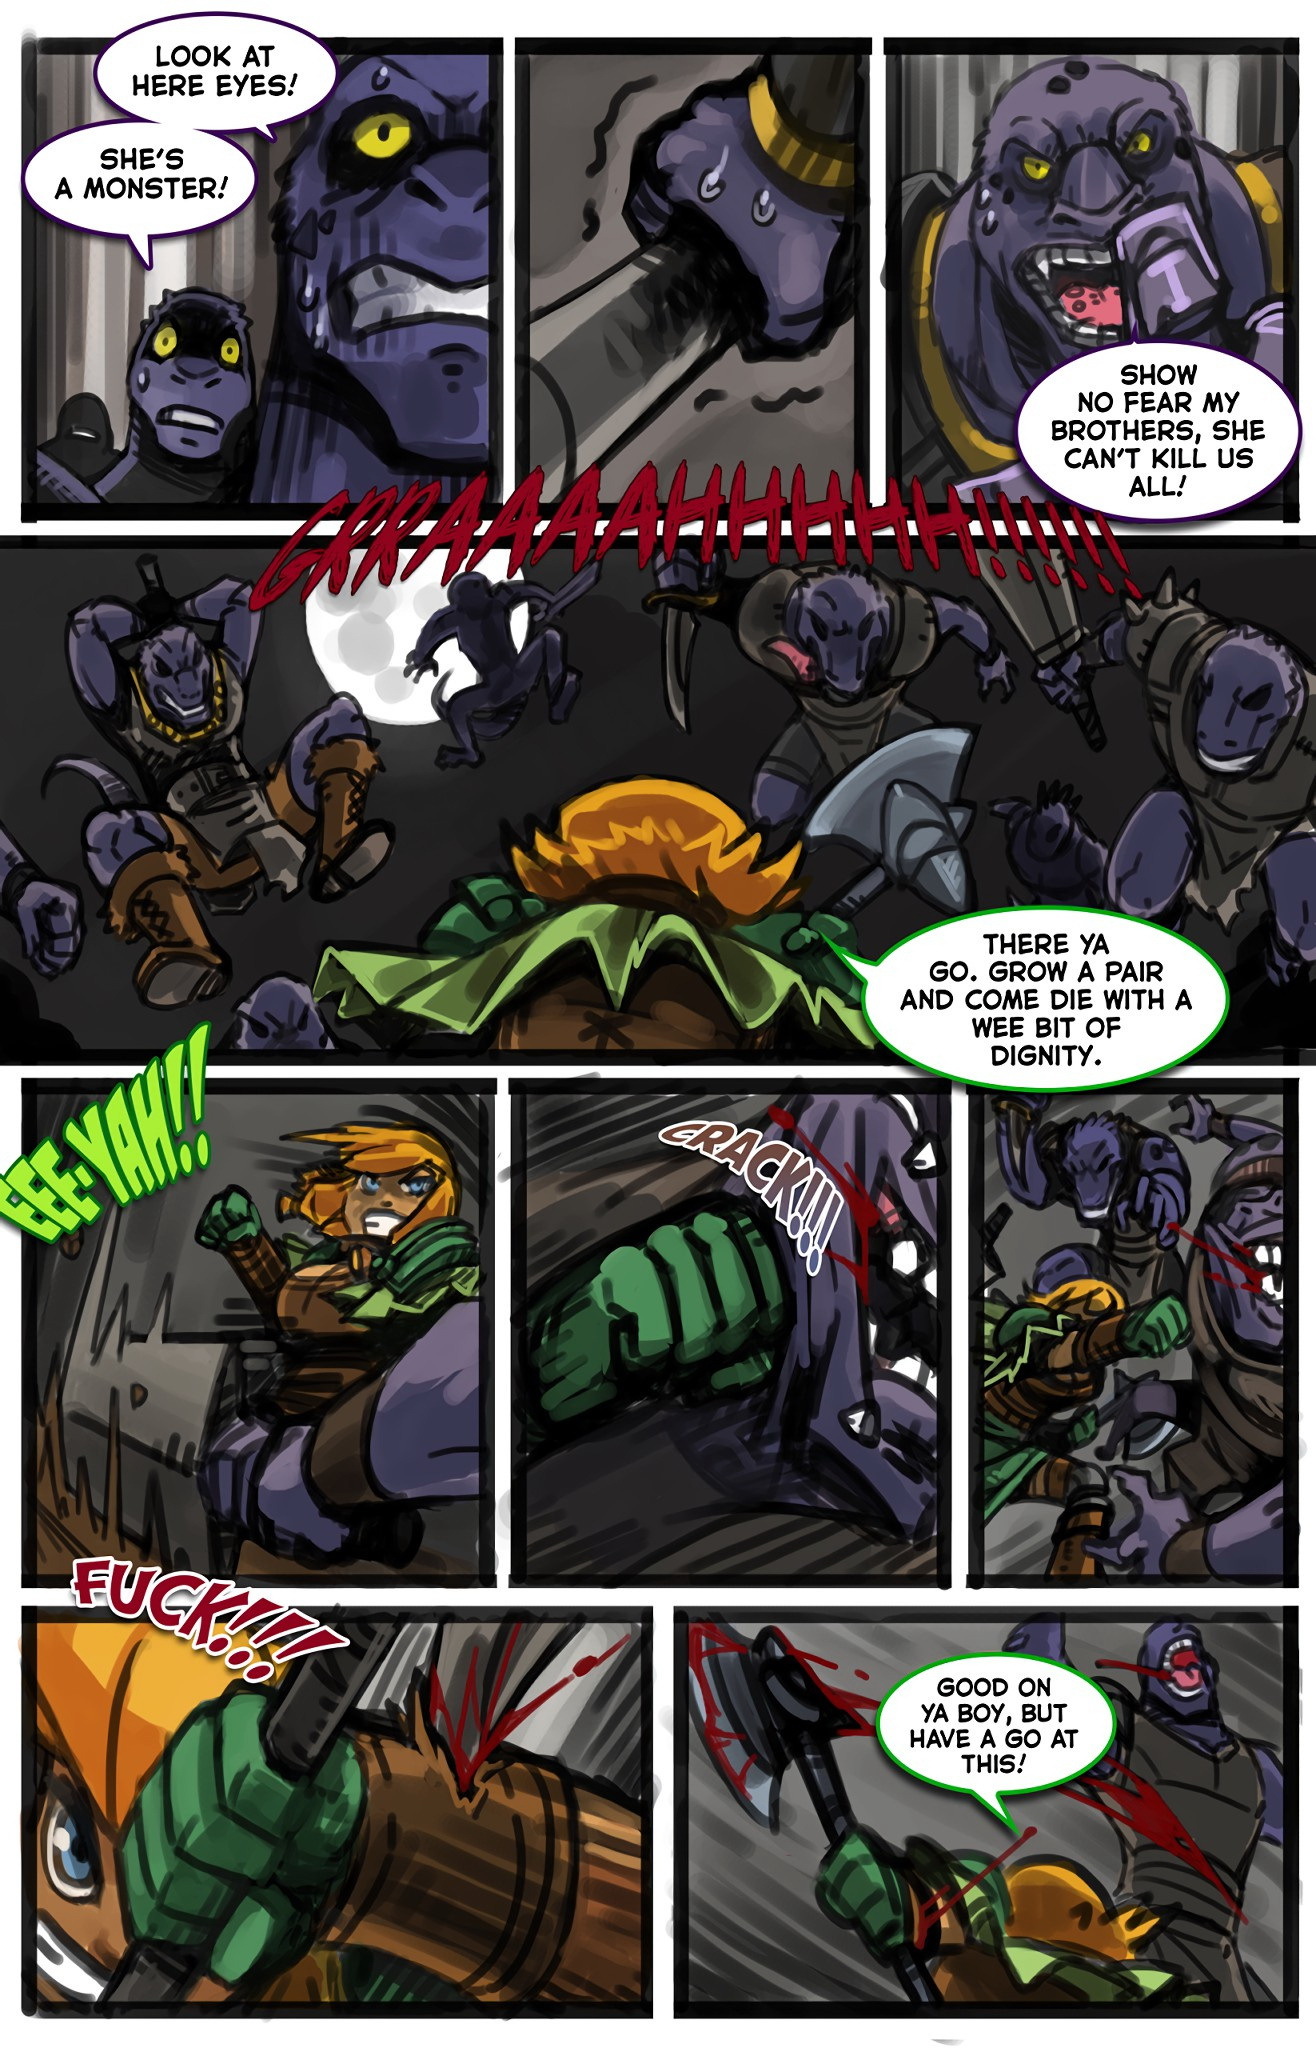 Cheska the Mighty - Page 4